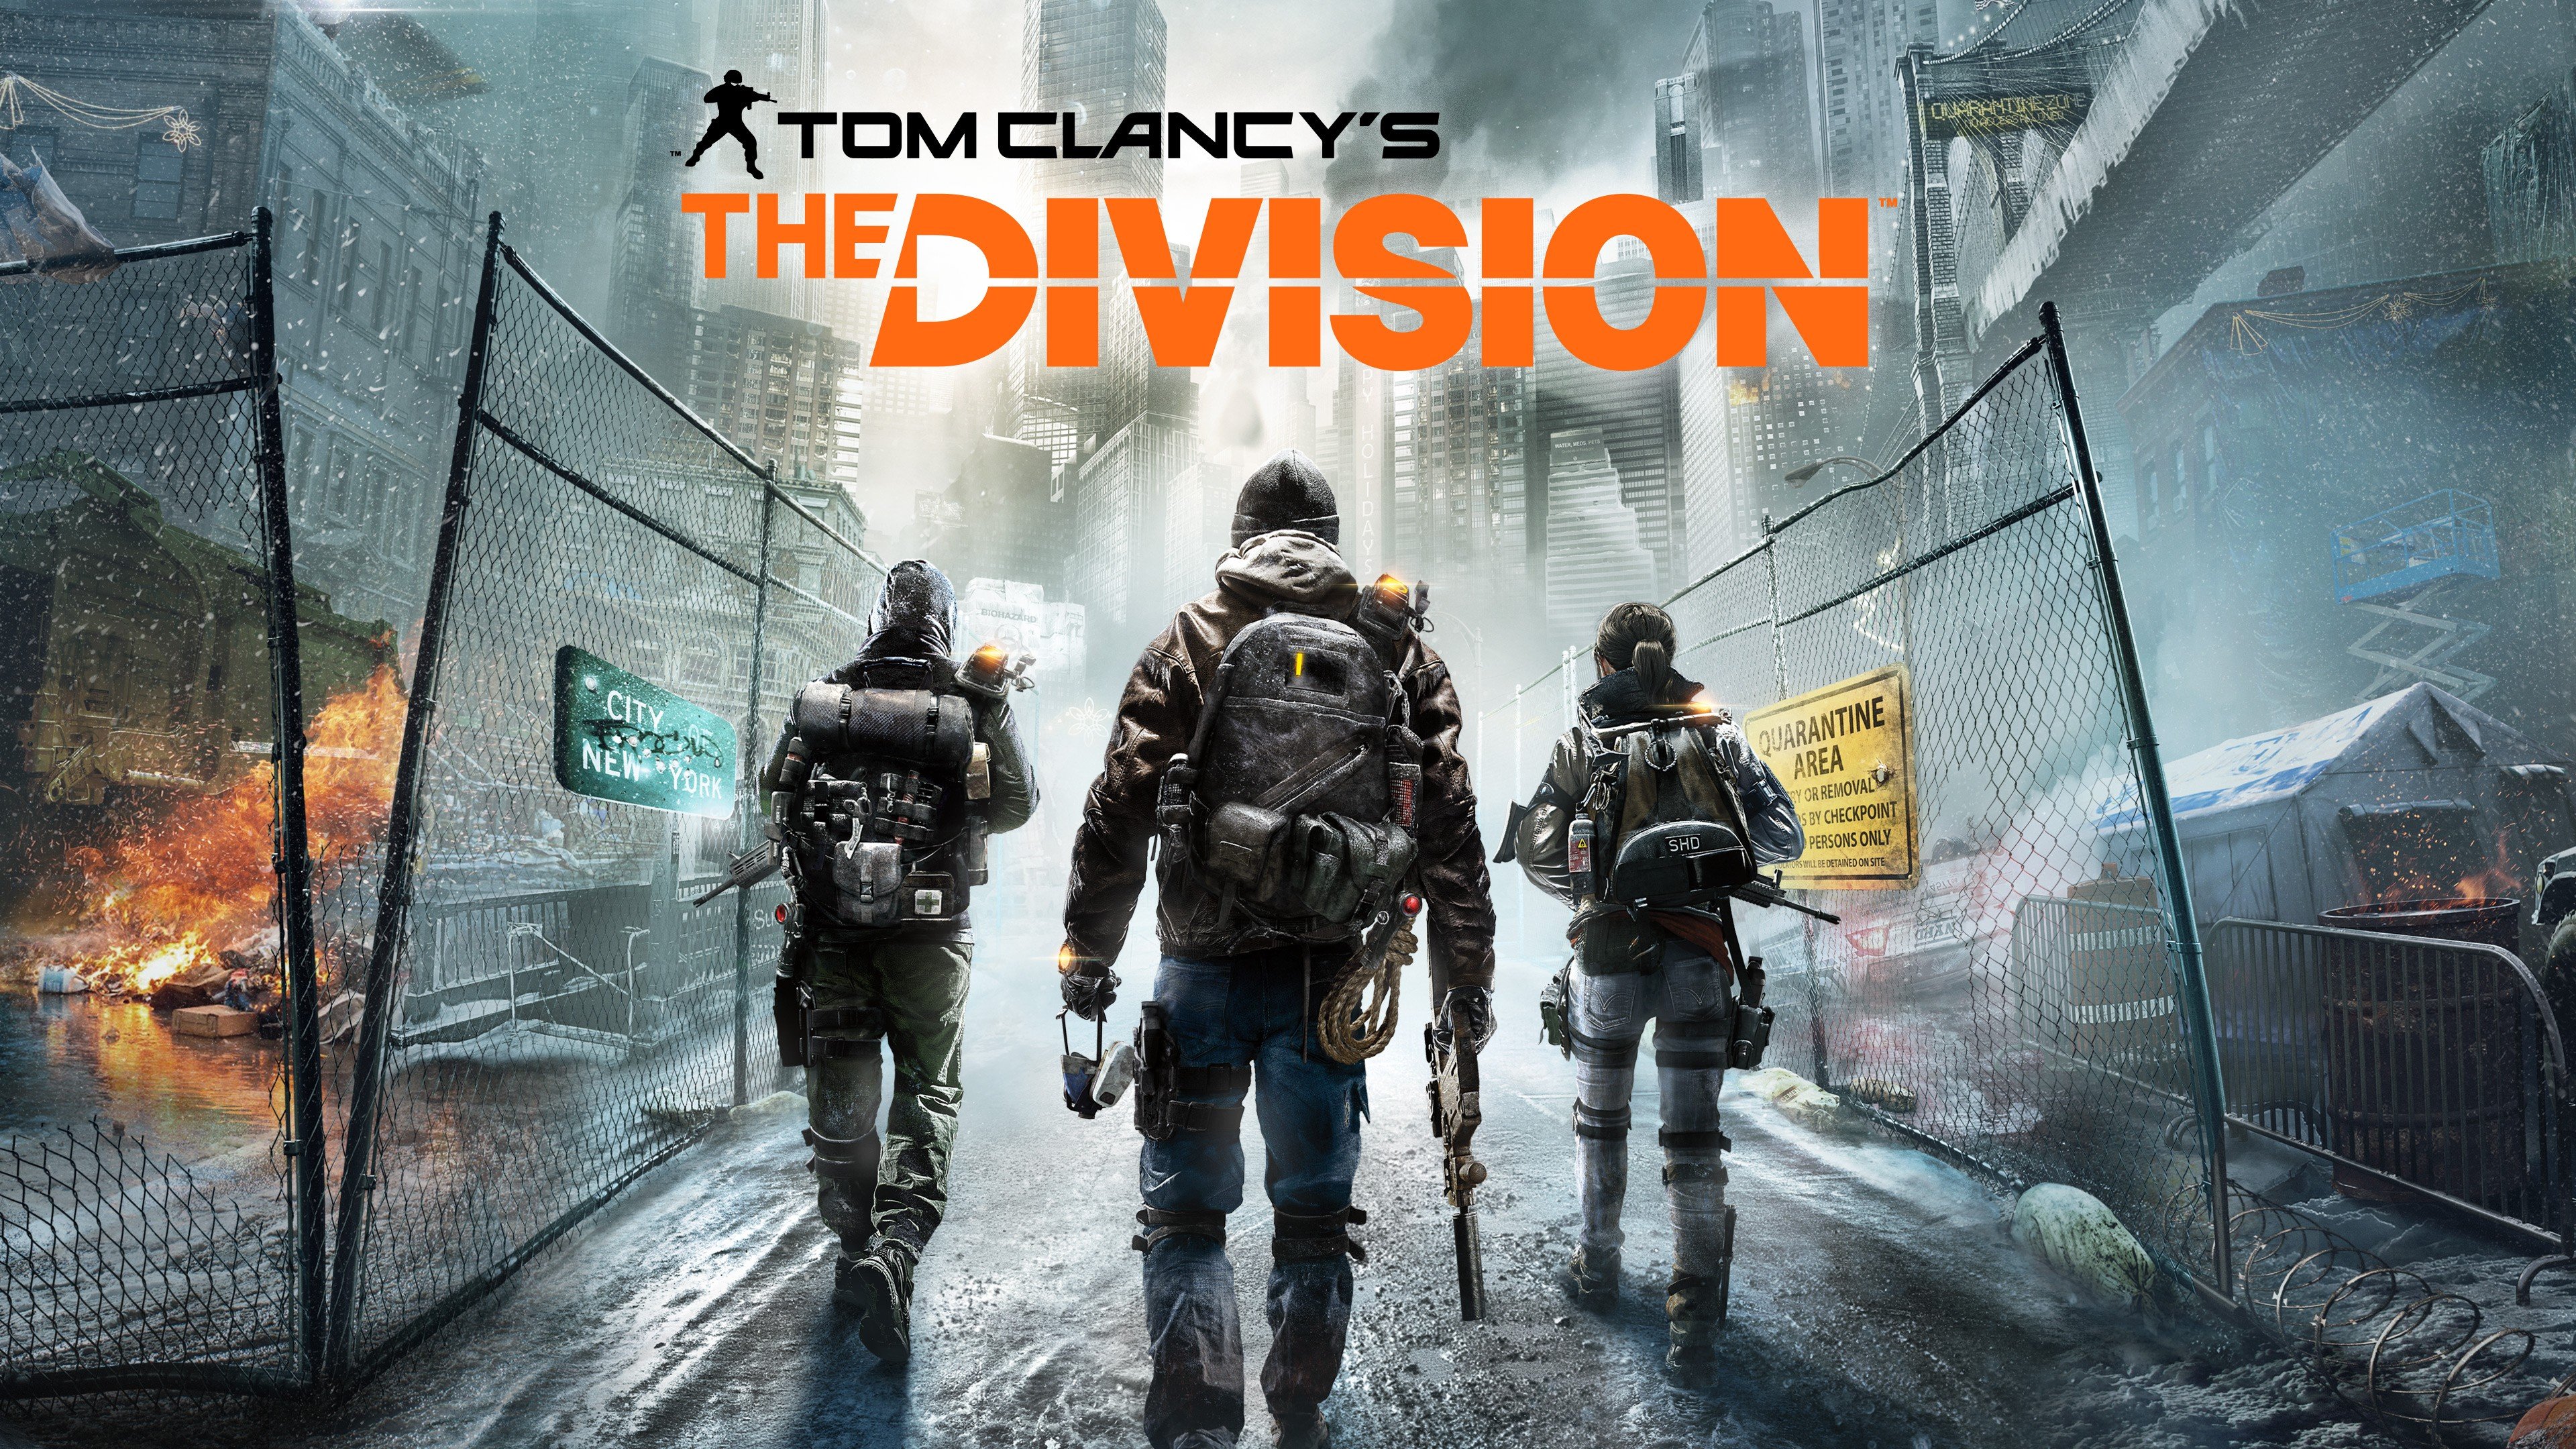 people, Tom Clancys The Division, Computer game, Apocalyptic, Weapon Wallpaper